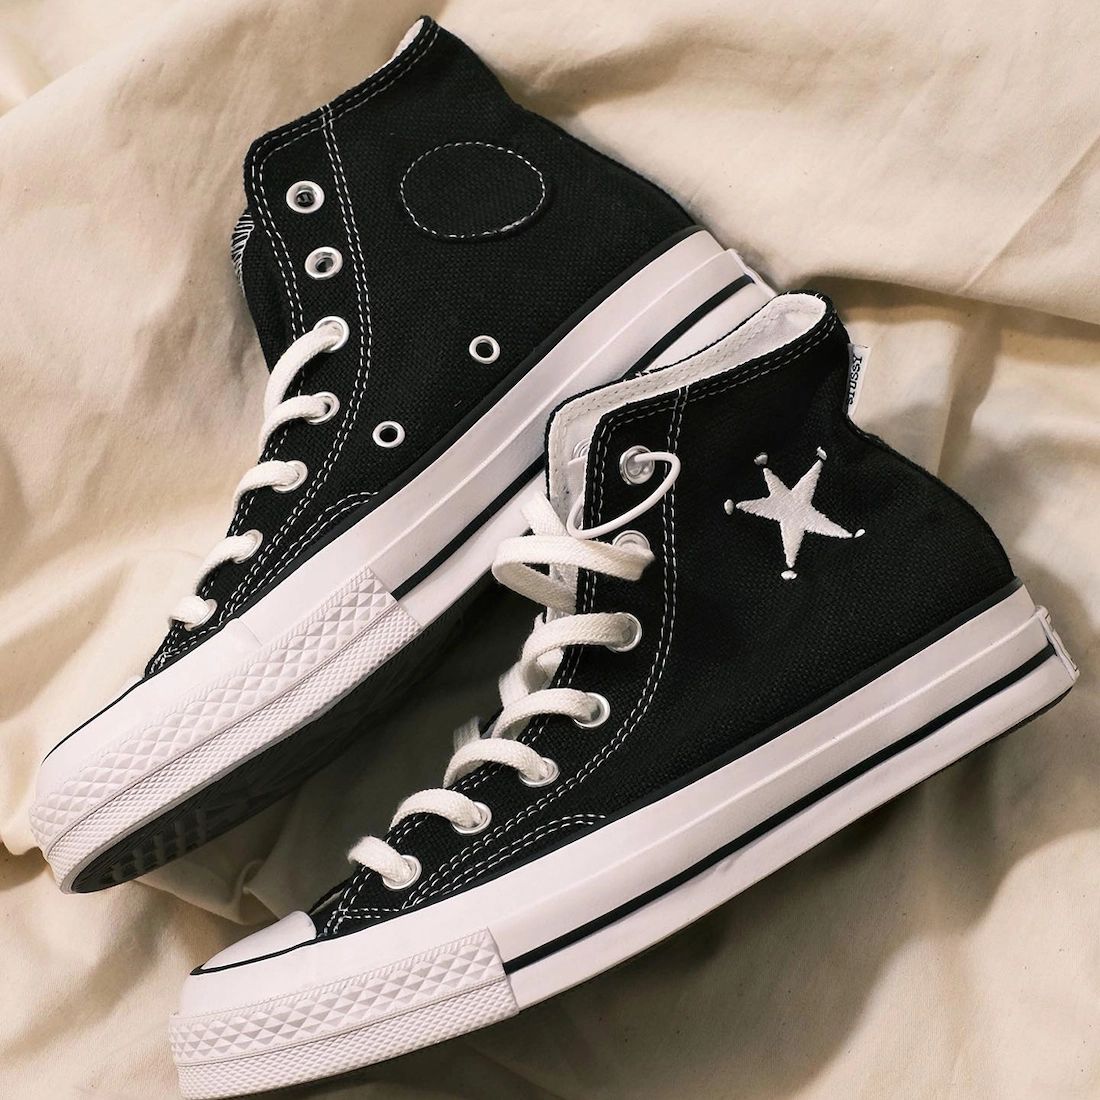 The lateral side of the Converse Chuck Taylor All Star The Great Outdoors